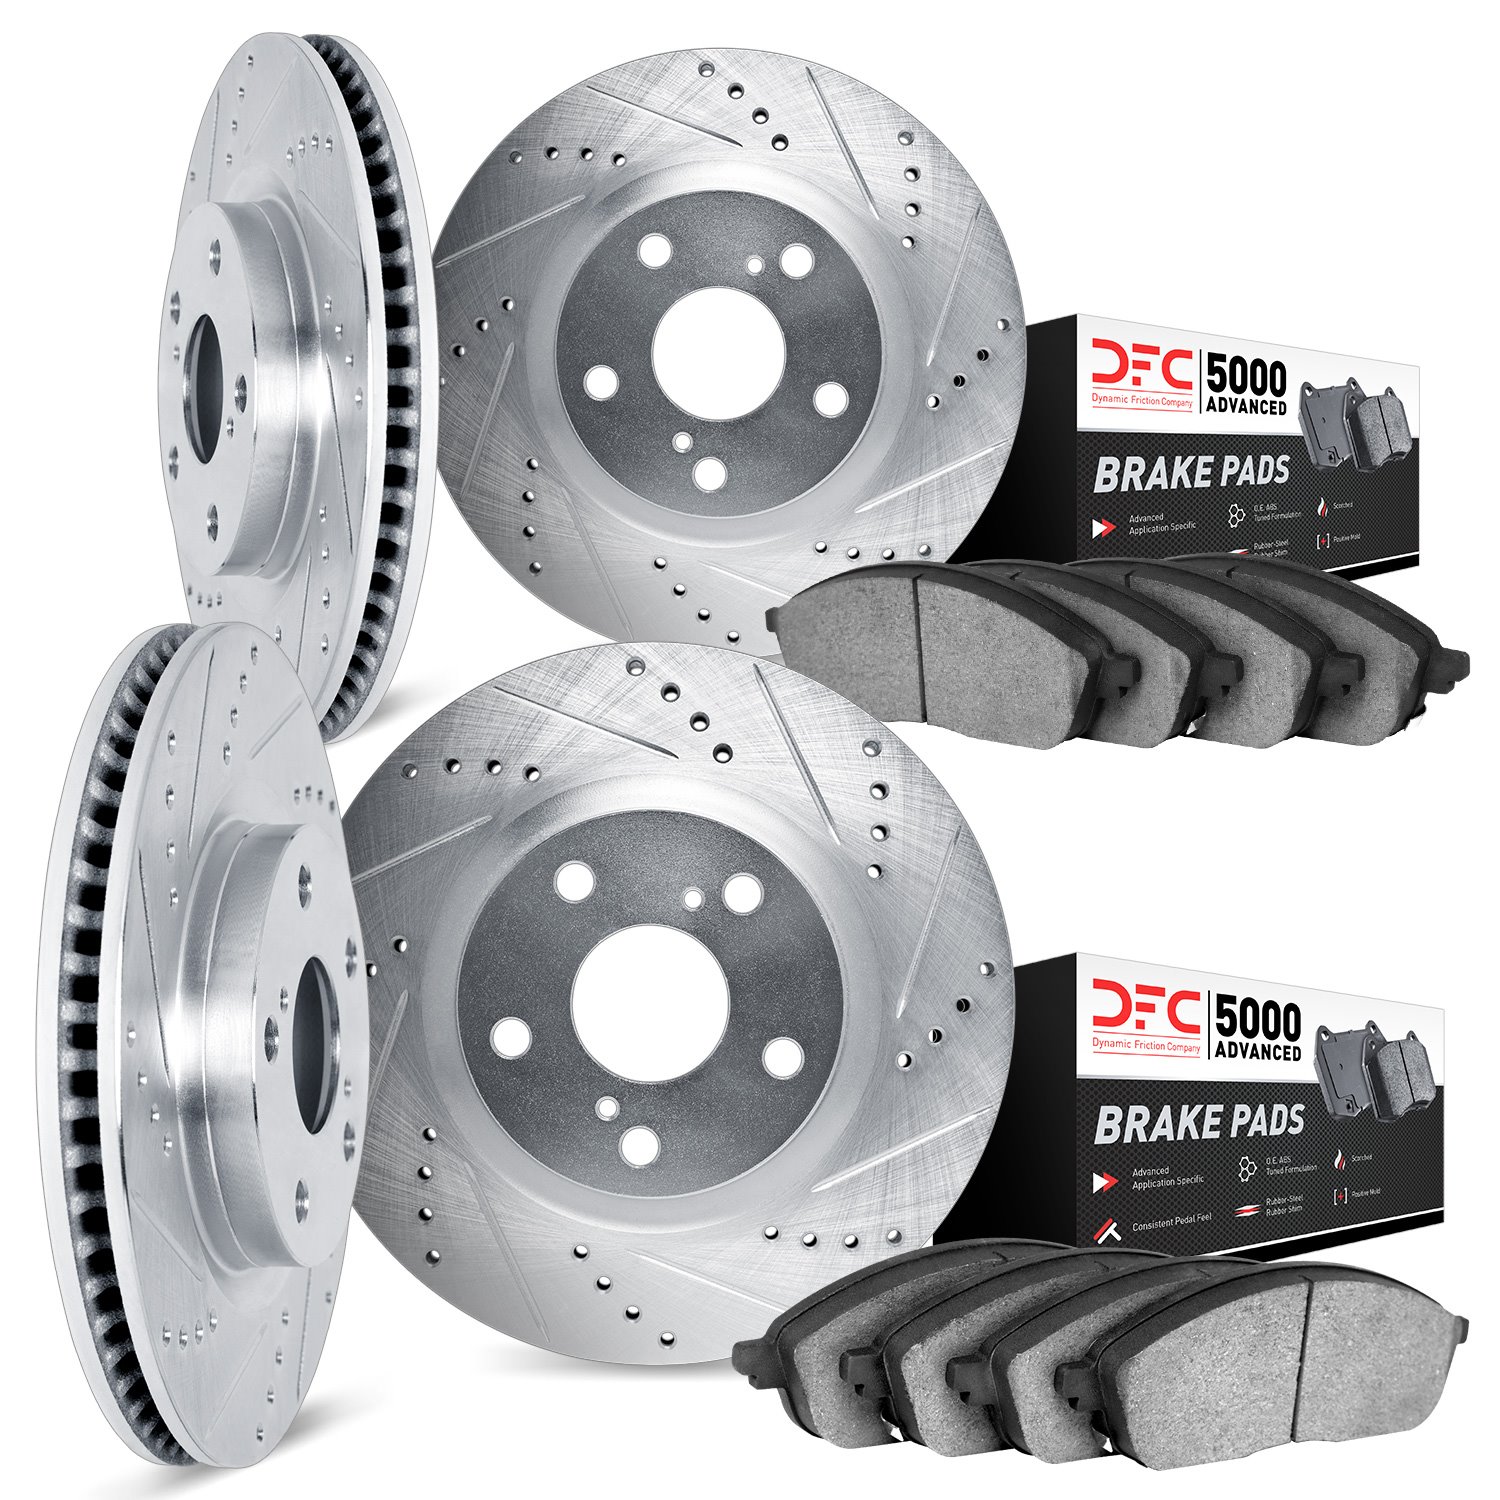 7504-26003 Drilled/Slotted Brake Rotors w/5000 Advanced Brake Pads Kit [Silver], Fits Select Tesla, Position: Front and Rear